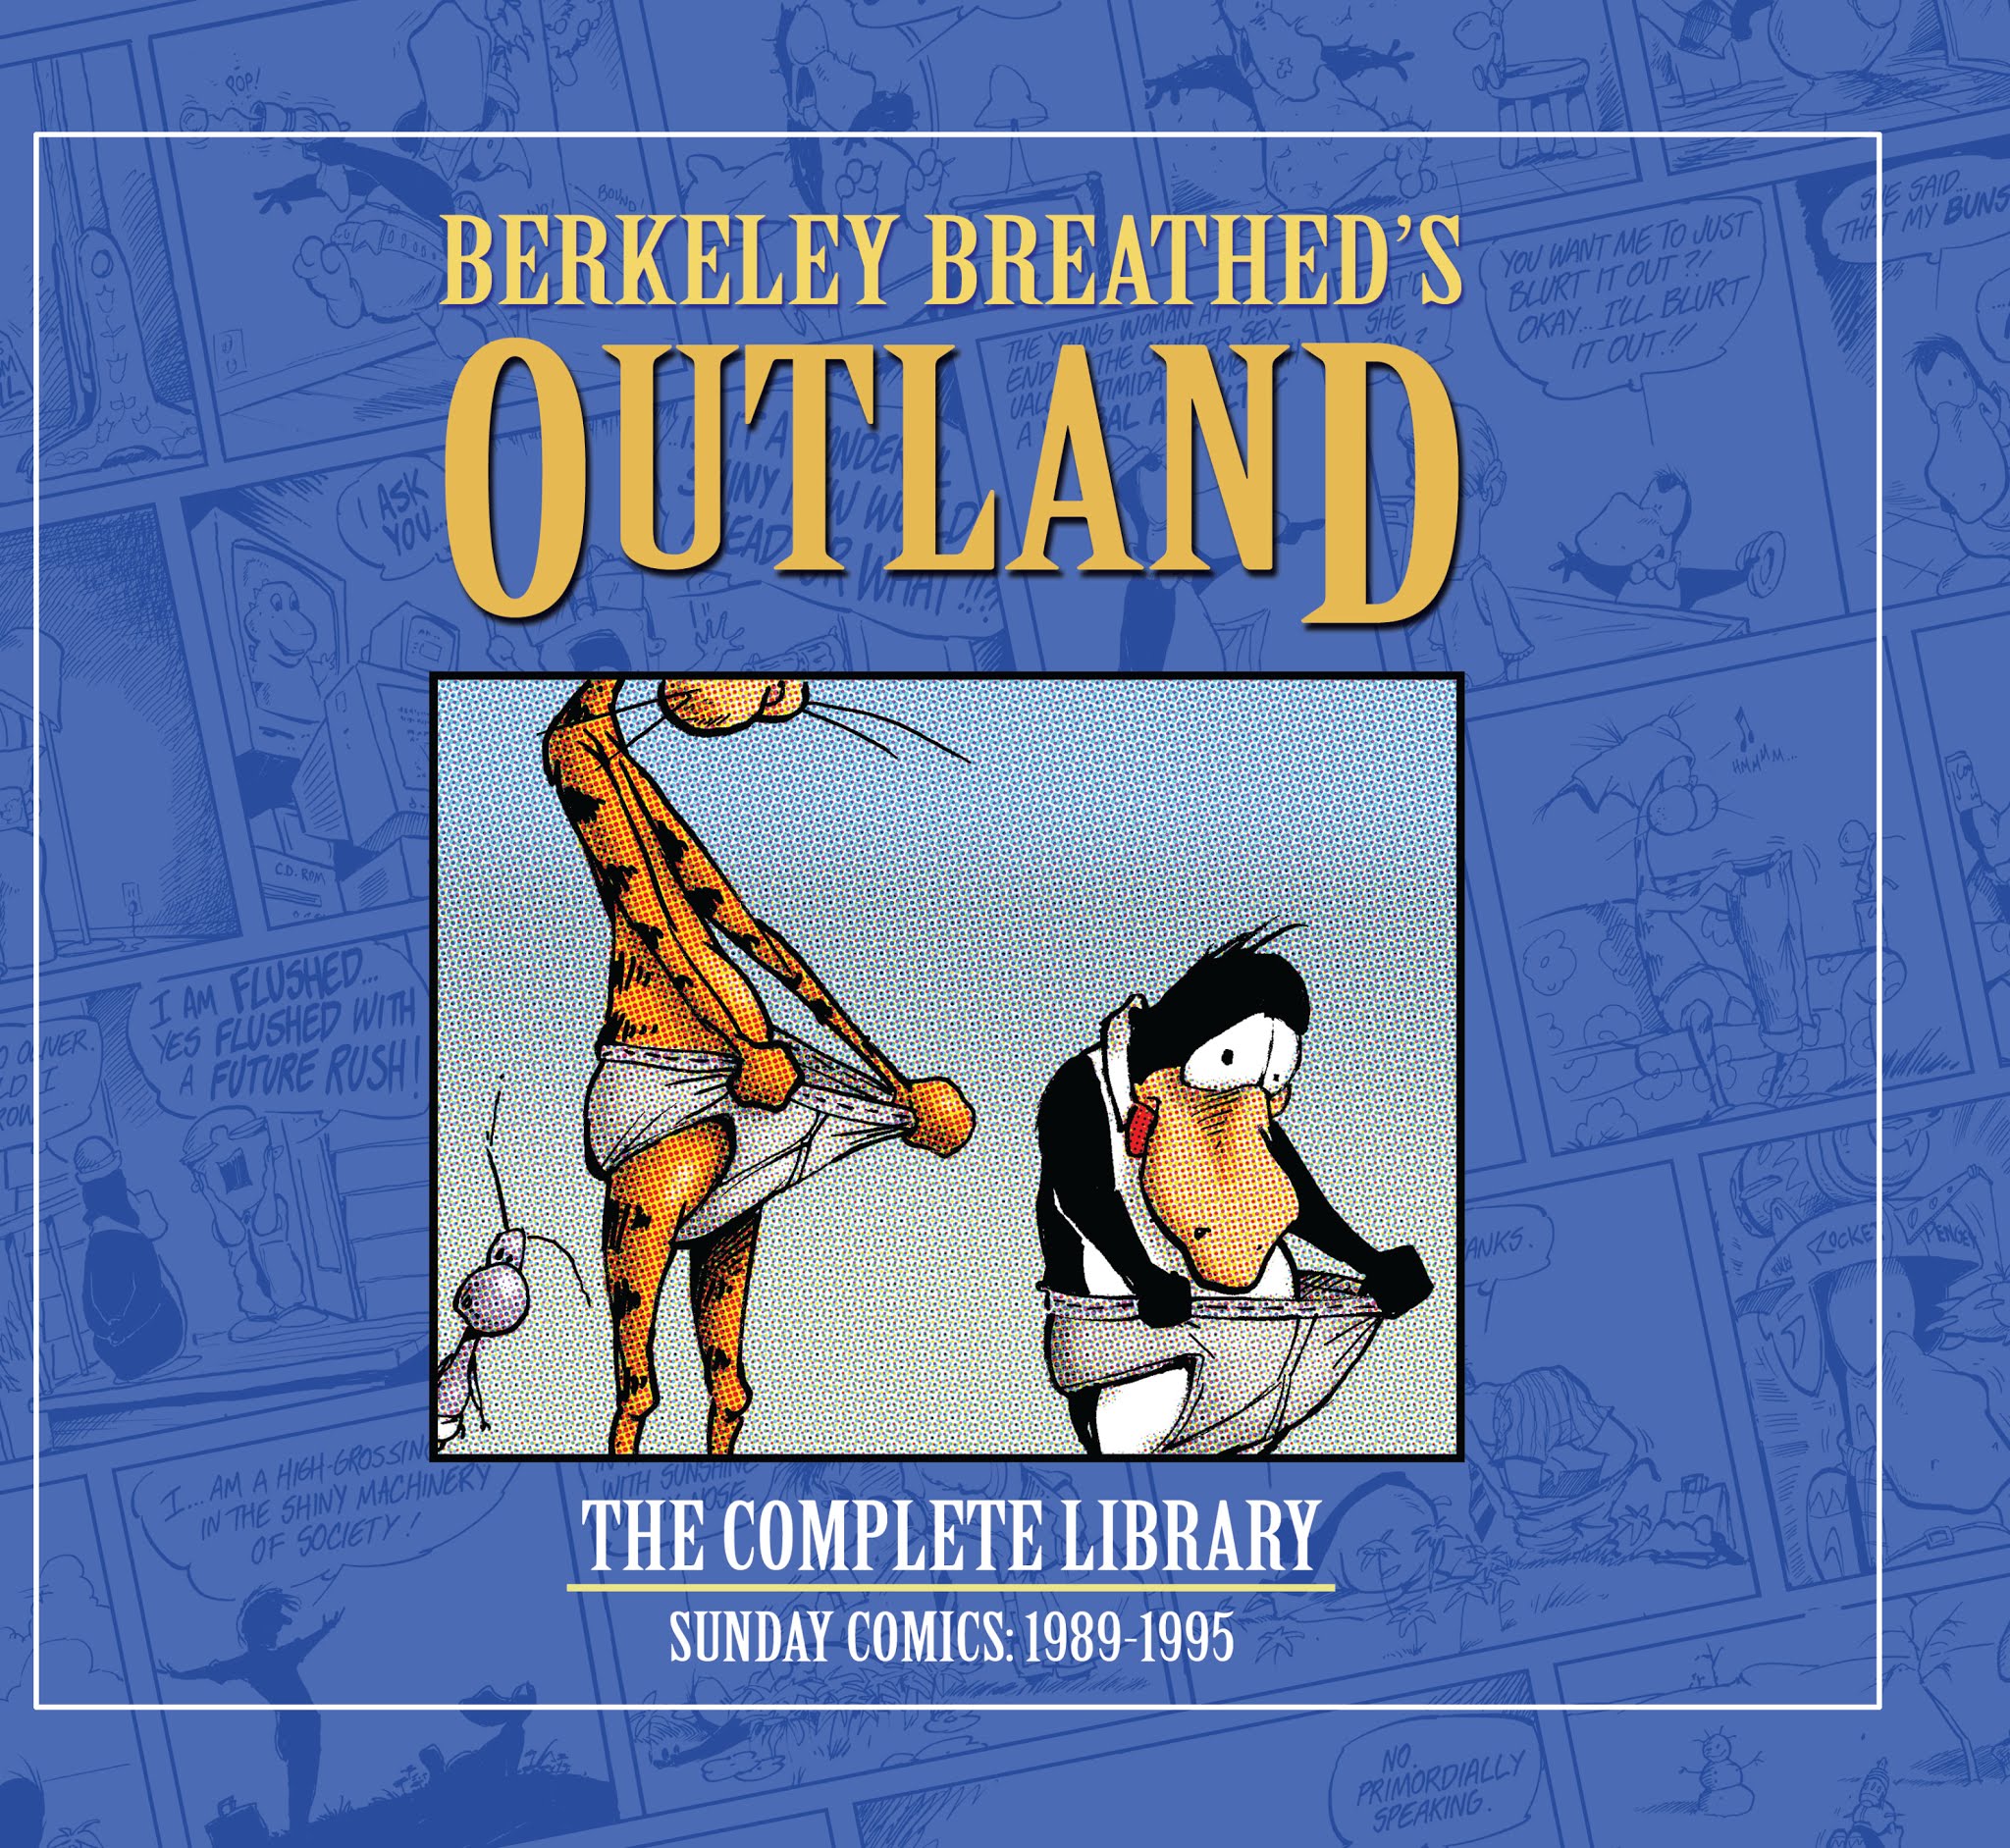 Read online Berkeley Breathed’s Outland comic -  Issue # TPB (Part 1) - 1